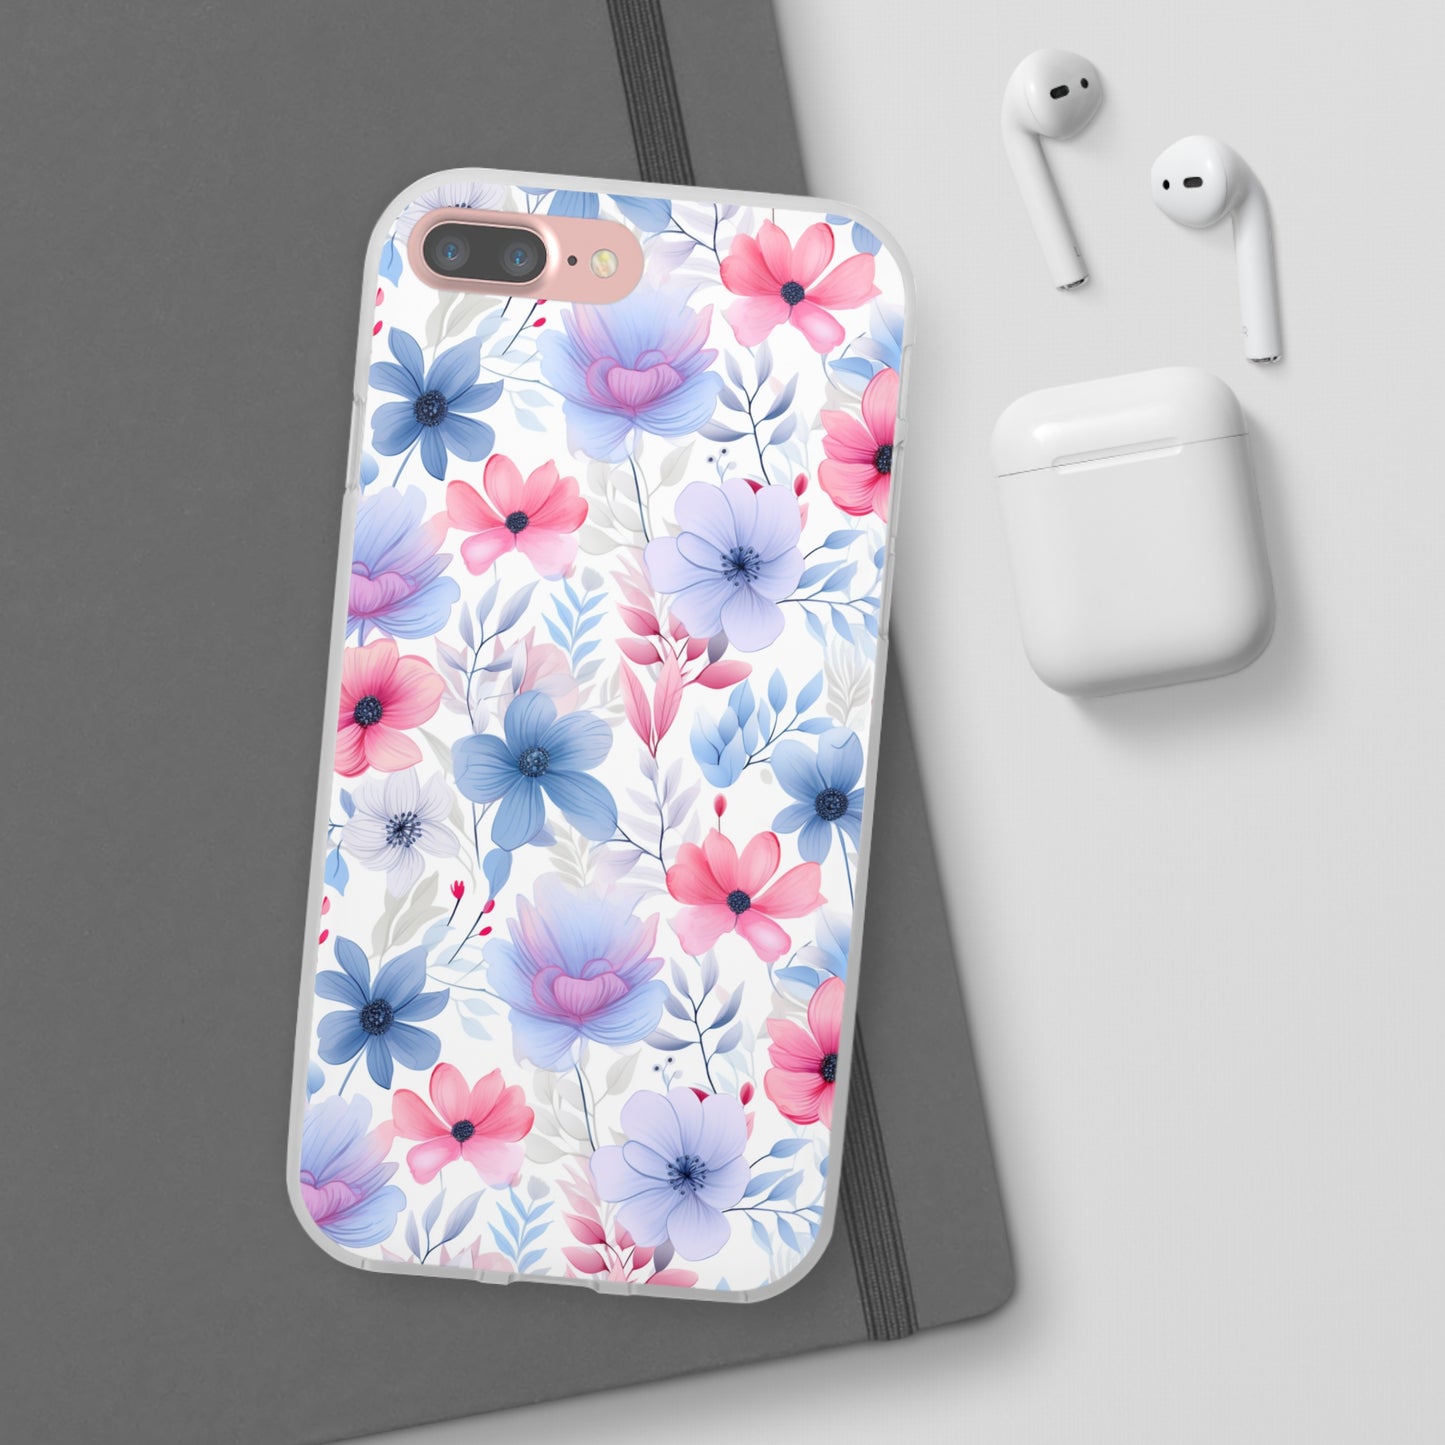 Floral Whispers - Soft Hues of Violets, Pinks, and Blues - Flexi Phone Case Phone Case Pattern Symphony iPhone 7 Plus  